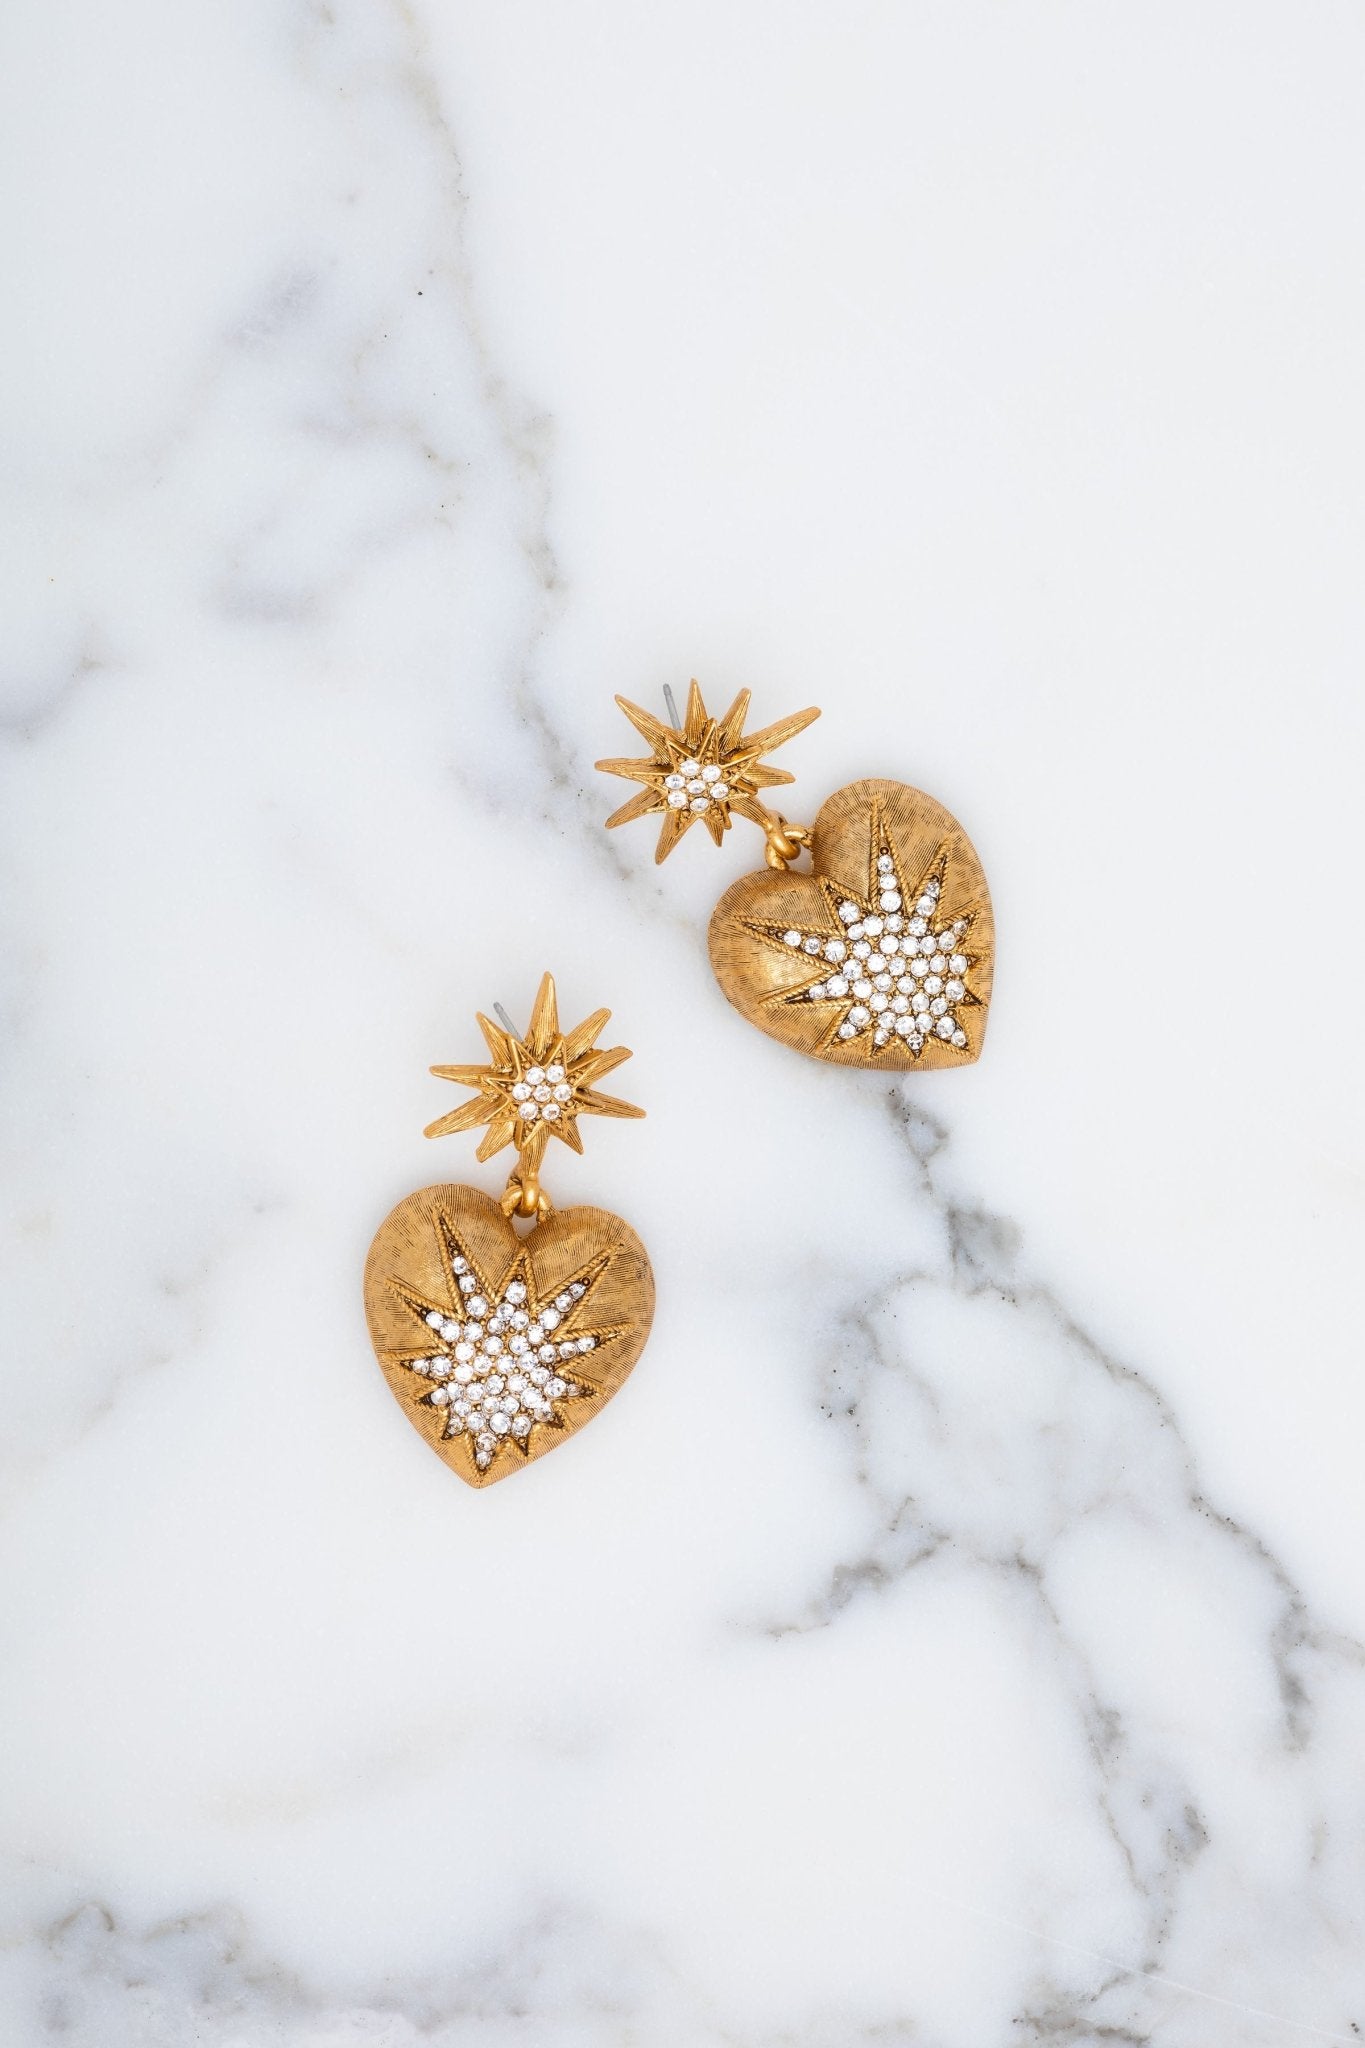 Hearts and Stars Statement Earrings